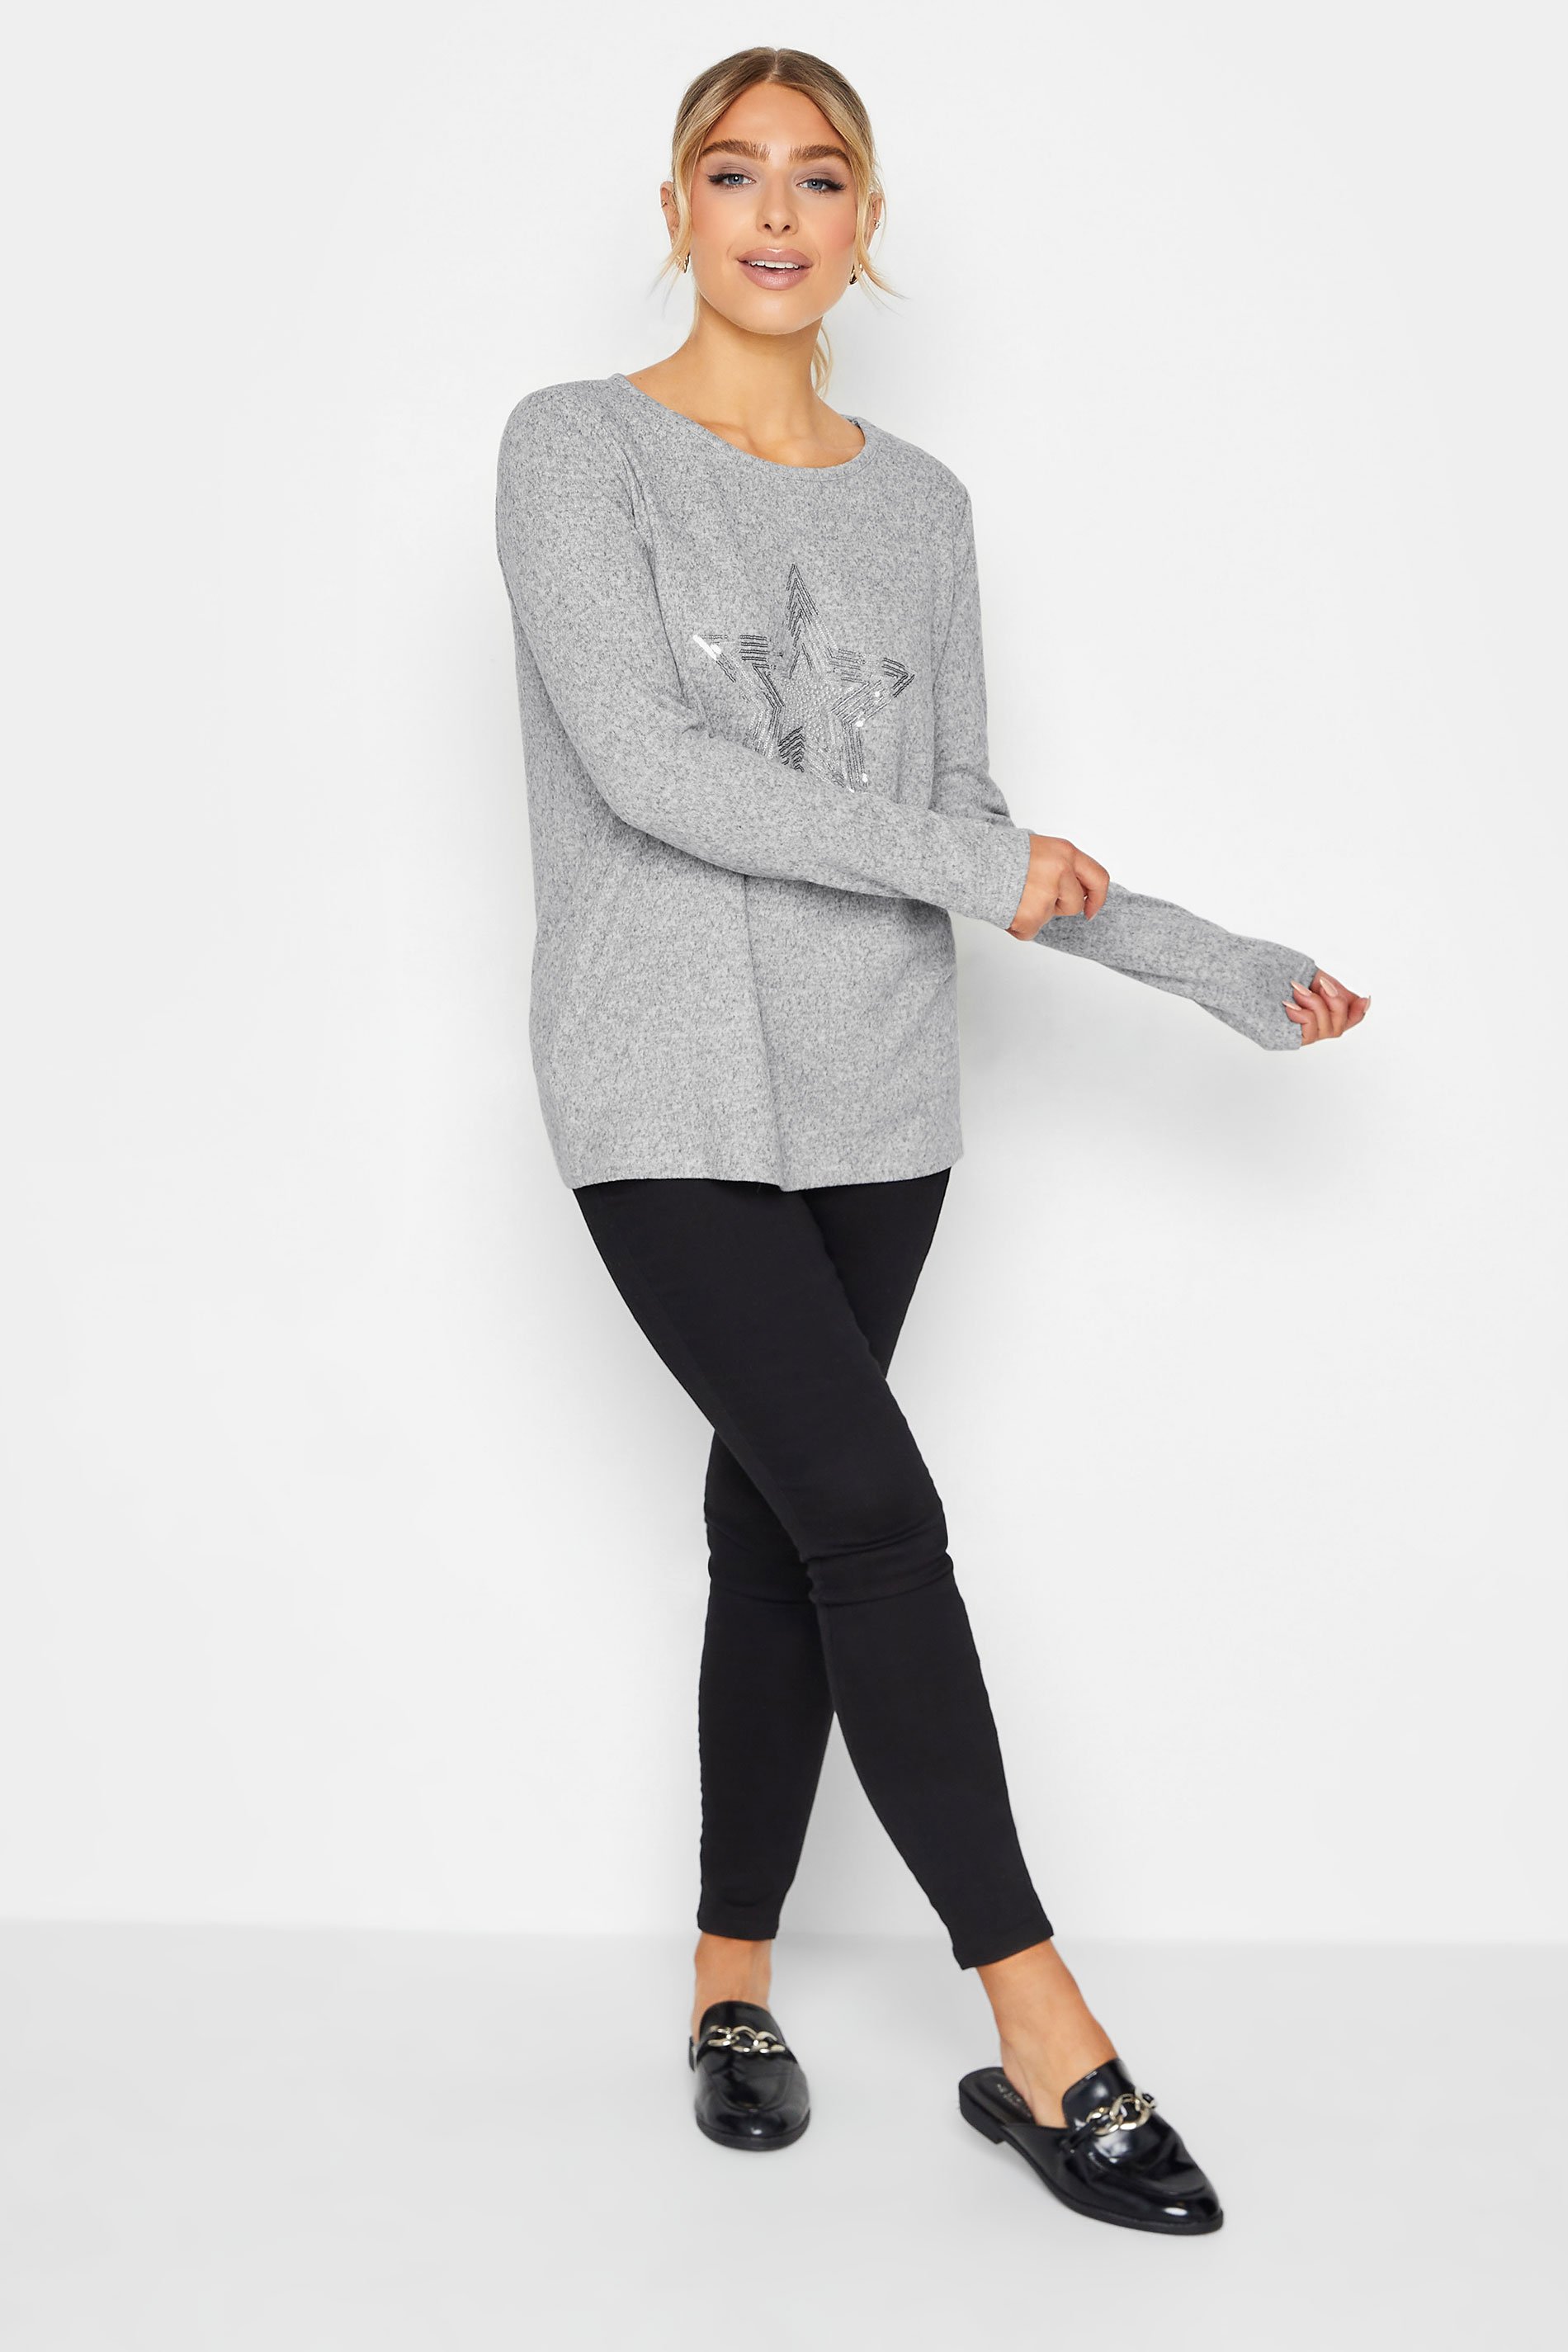 M&Co Grey Sequin Star Soft Touch Jumper | M&Co 2